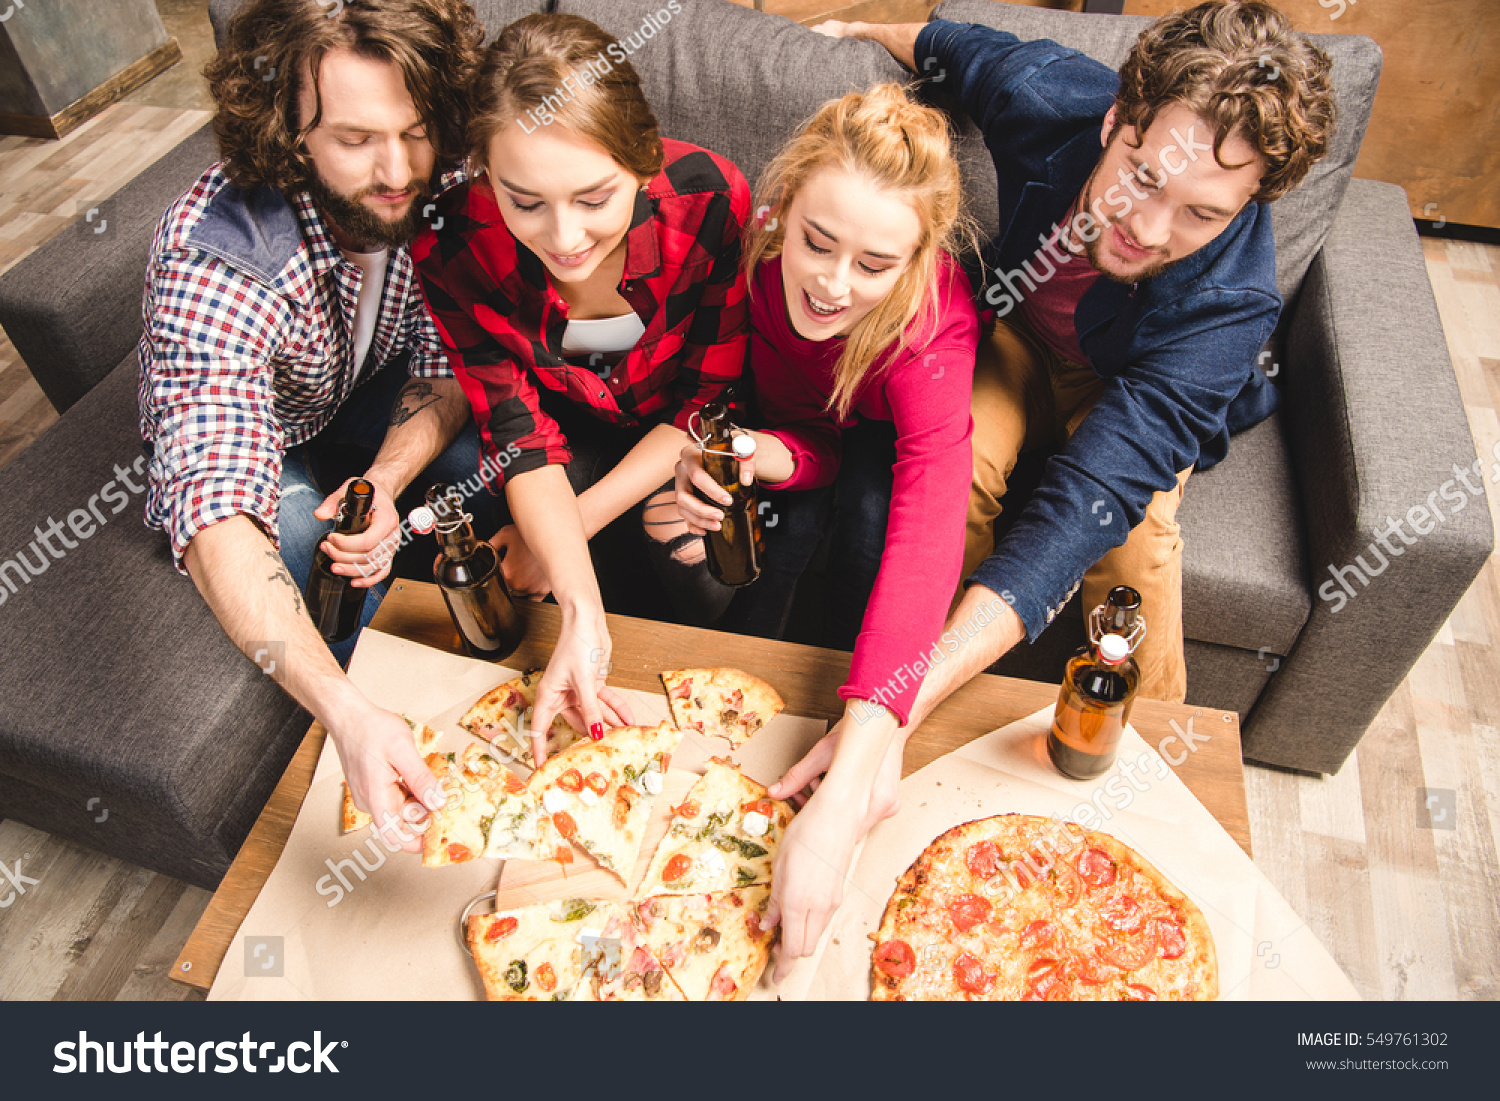 Happy friends enjoying pizza at home party  #549761302